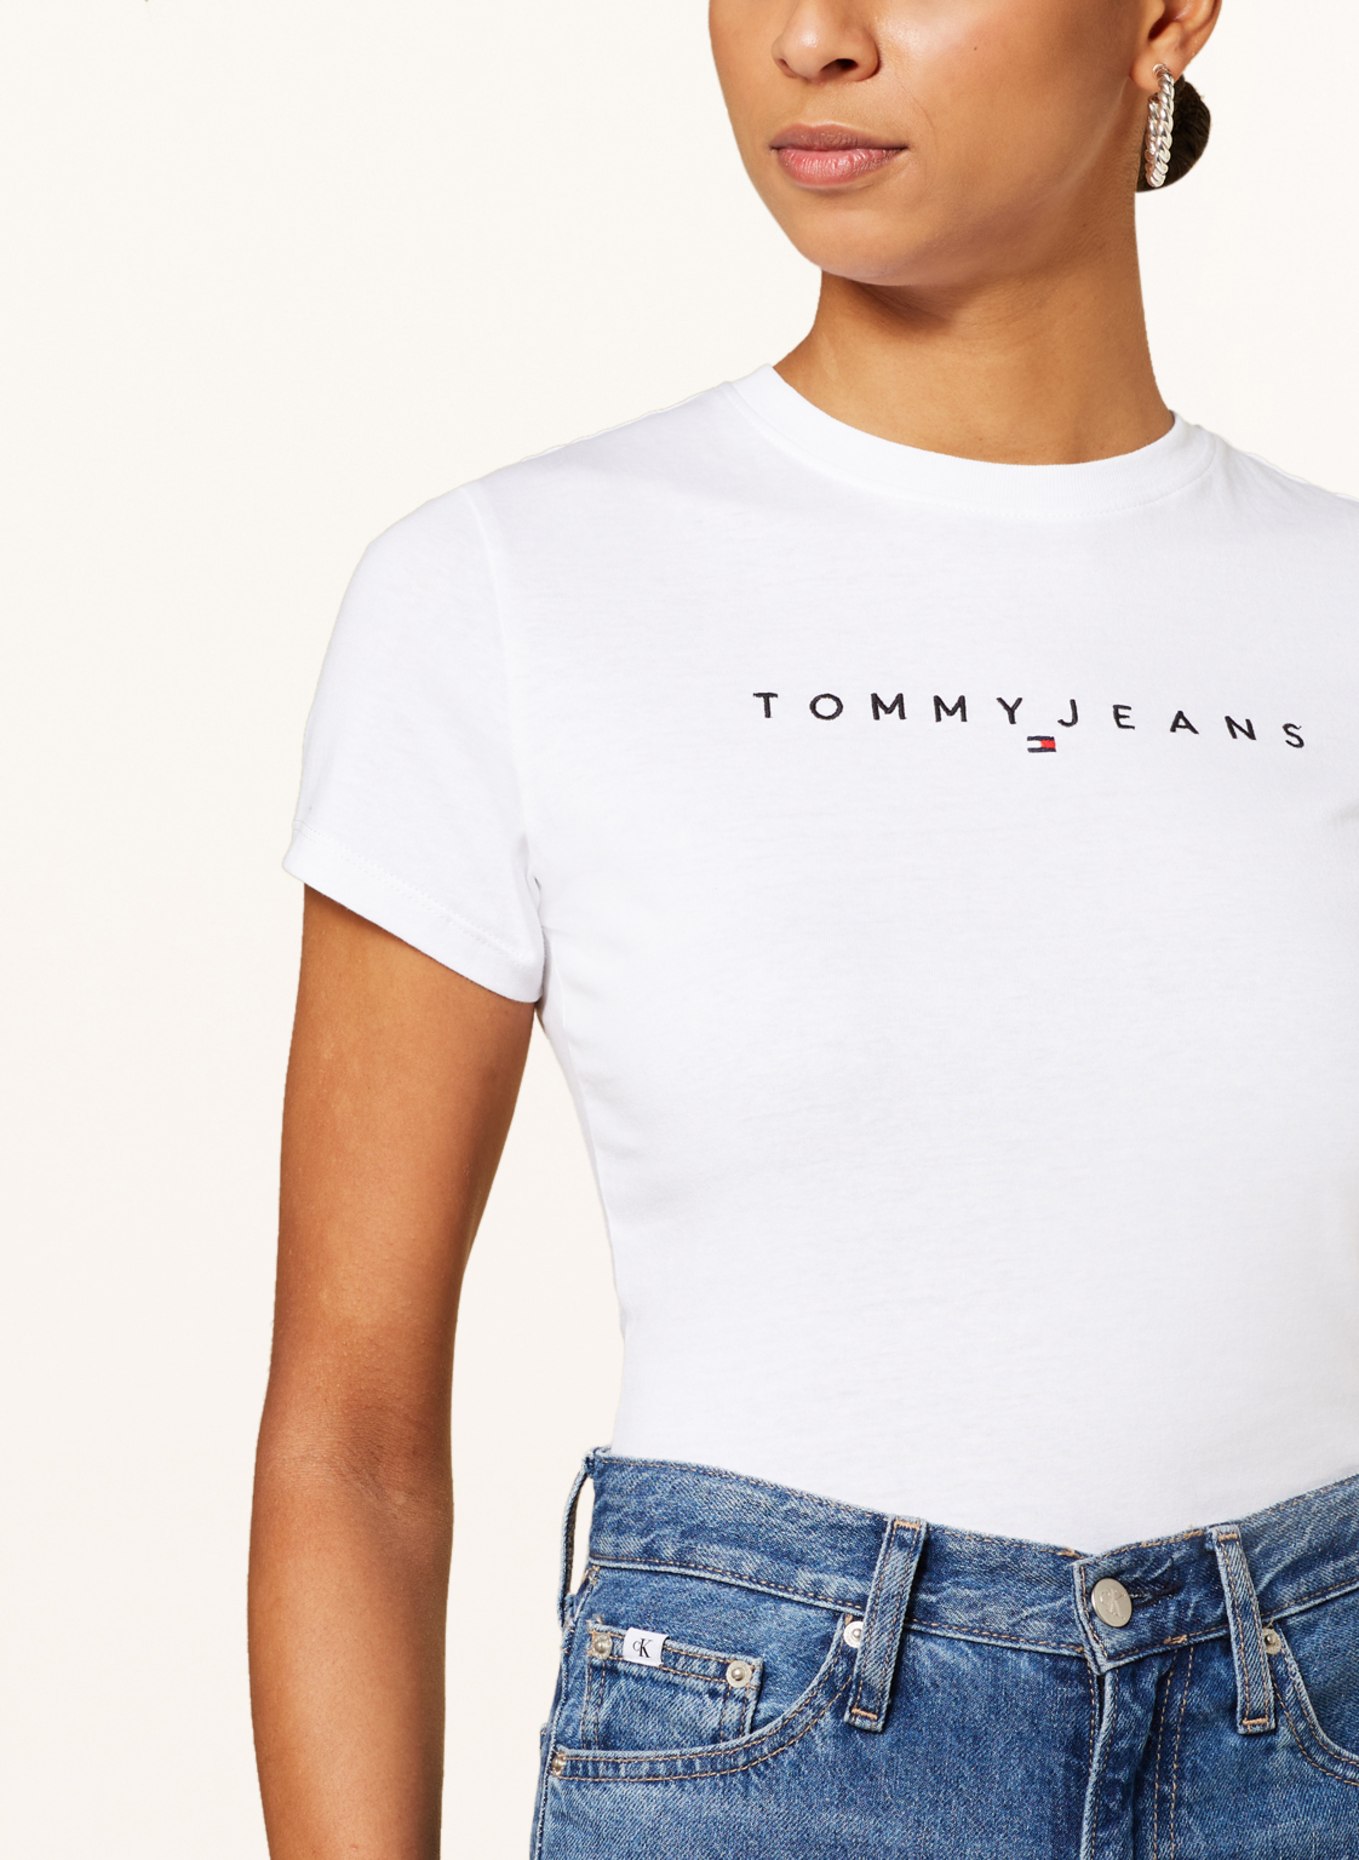 TOMMY JEANS T-Shirt, Farbe: WEISS (Bild 4)